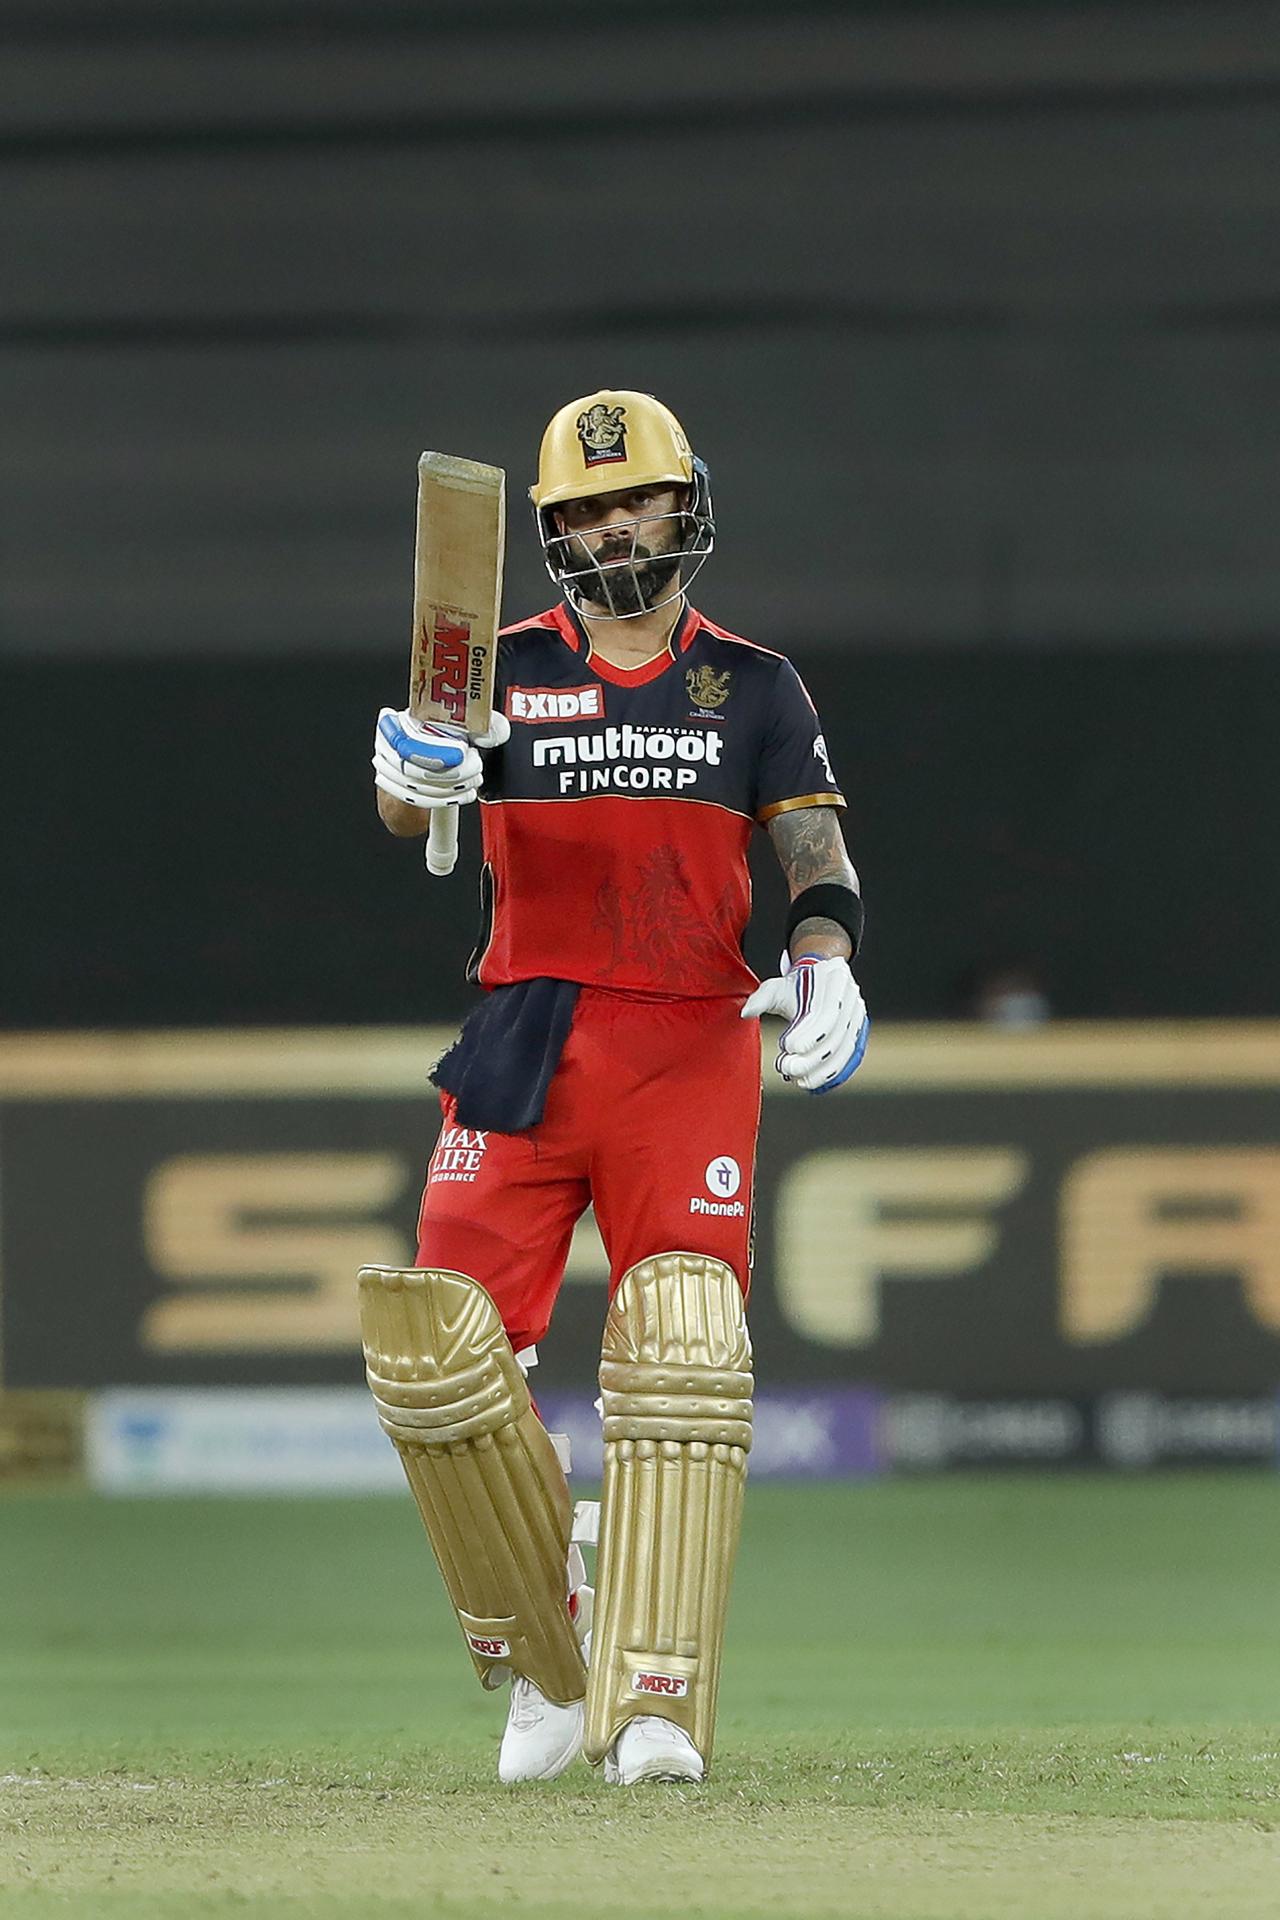 Virat Kohli captain of Royal Challengers Bangalore celebrating his half century during match 39 of the Indian Premier League between the Royal Challengers Bengaluru and Mumbai Indians. Kohli became the first Indian cricketer to score 10,000 runs in T20s. Pic/ PTI